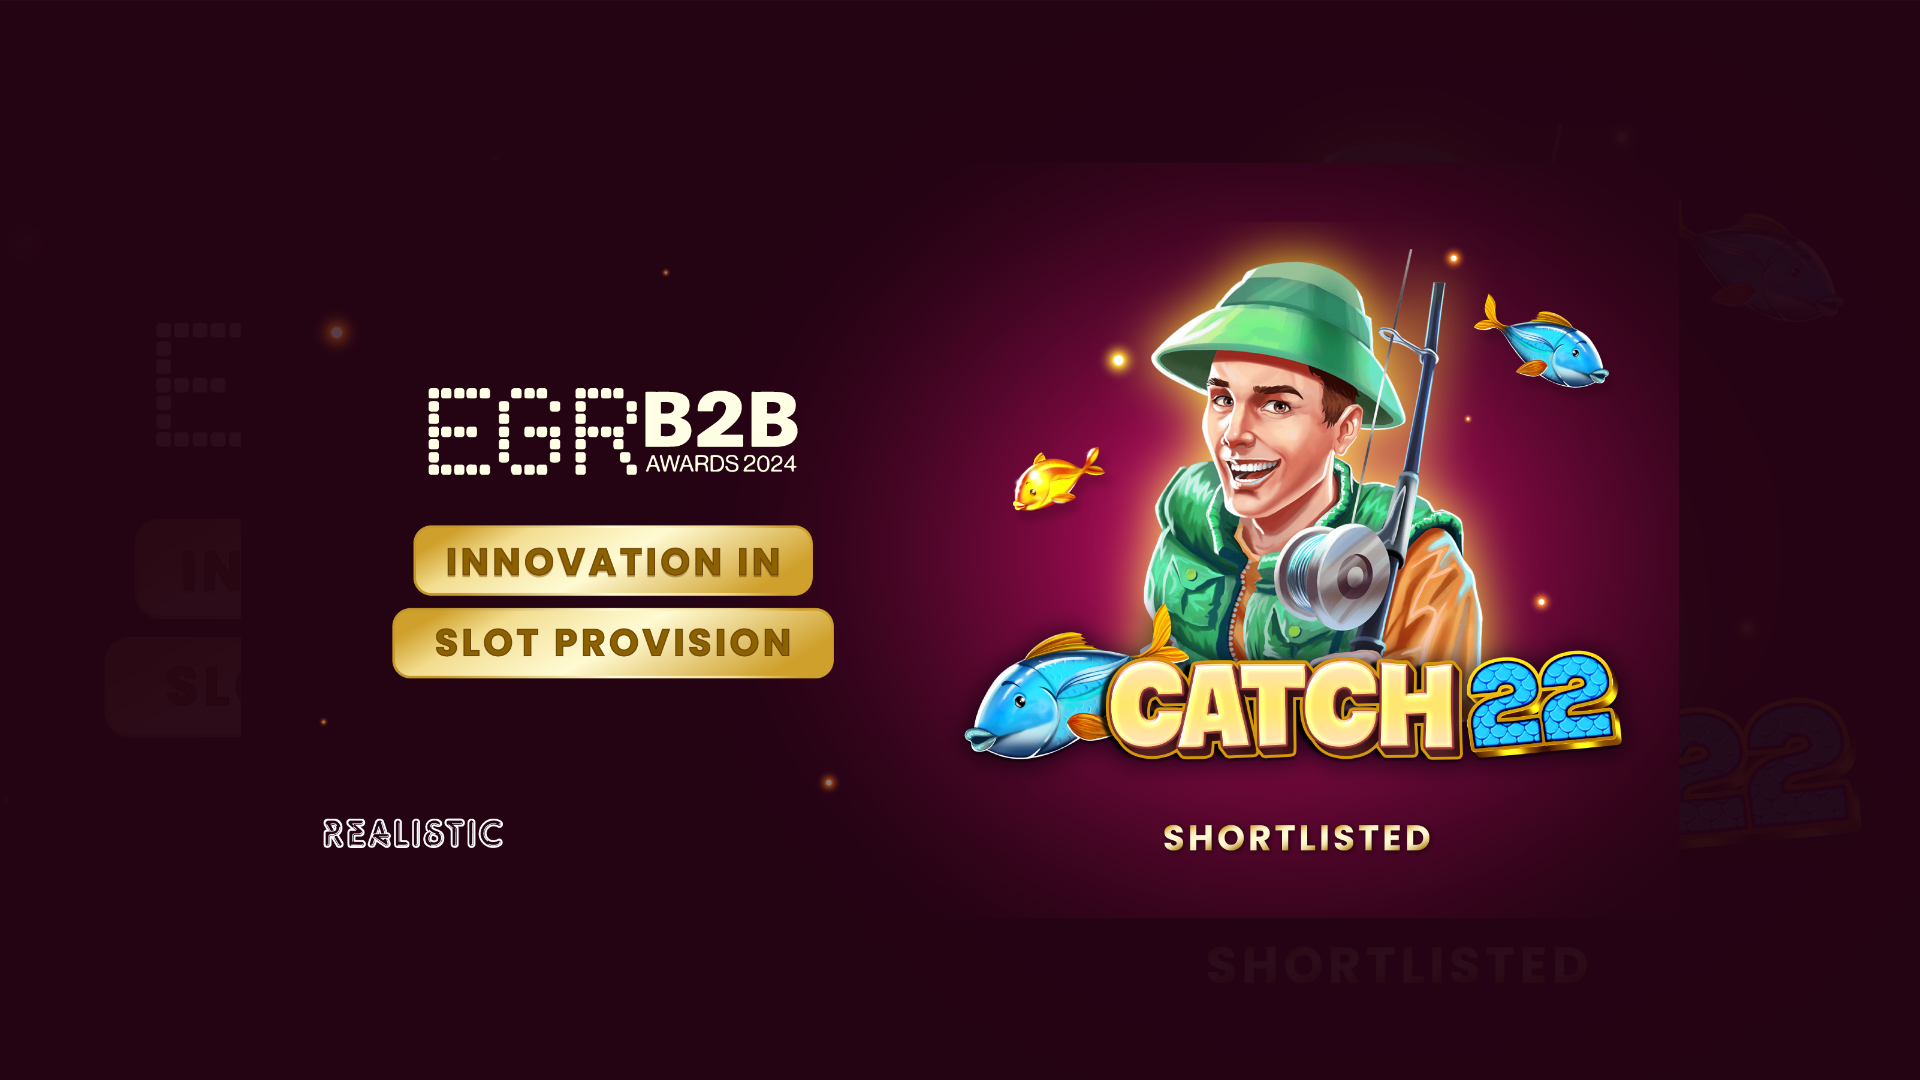 Catch 22 Shortlisted at the EGR B2B Awards 2024